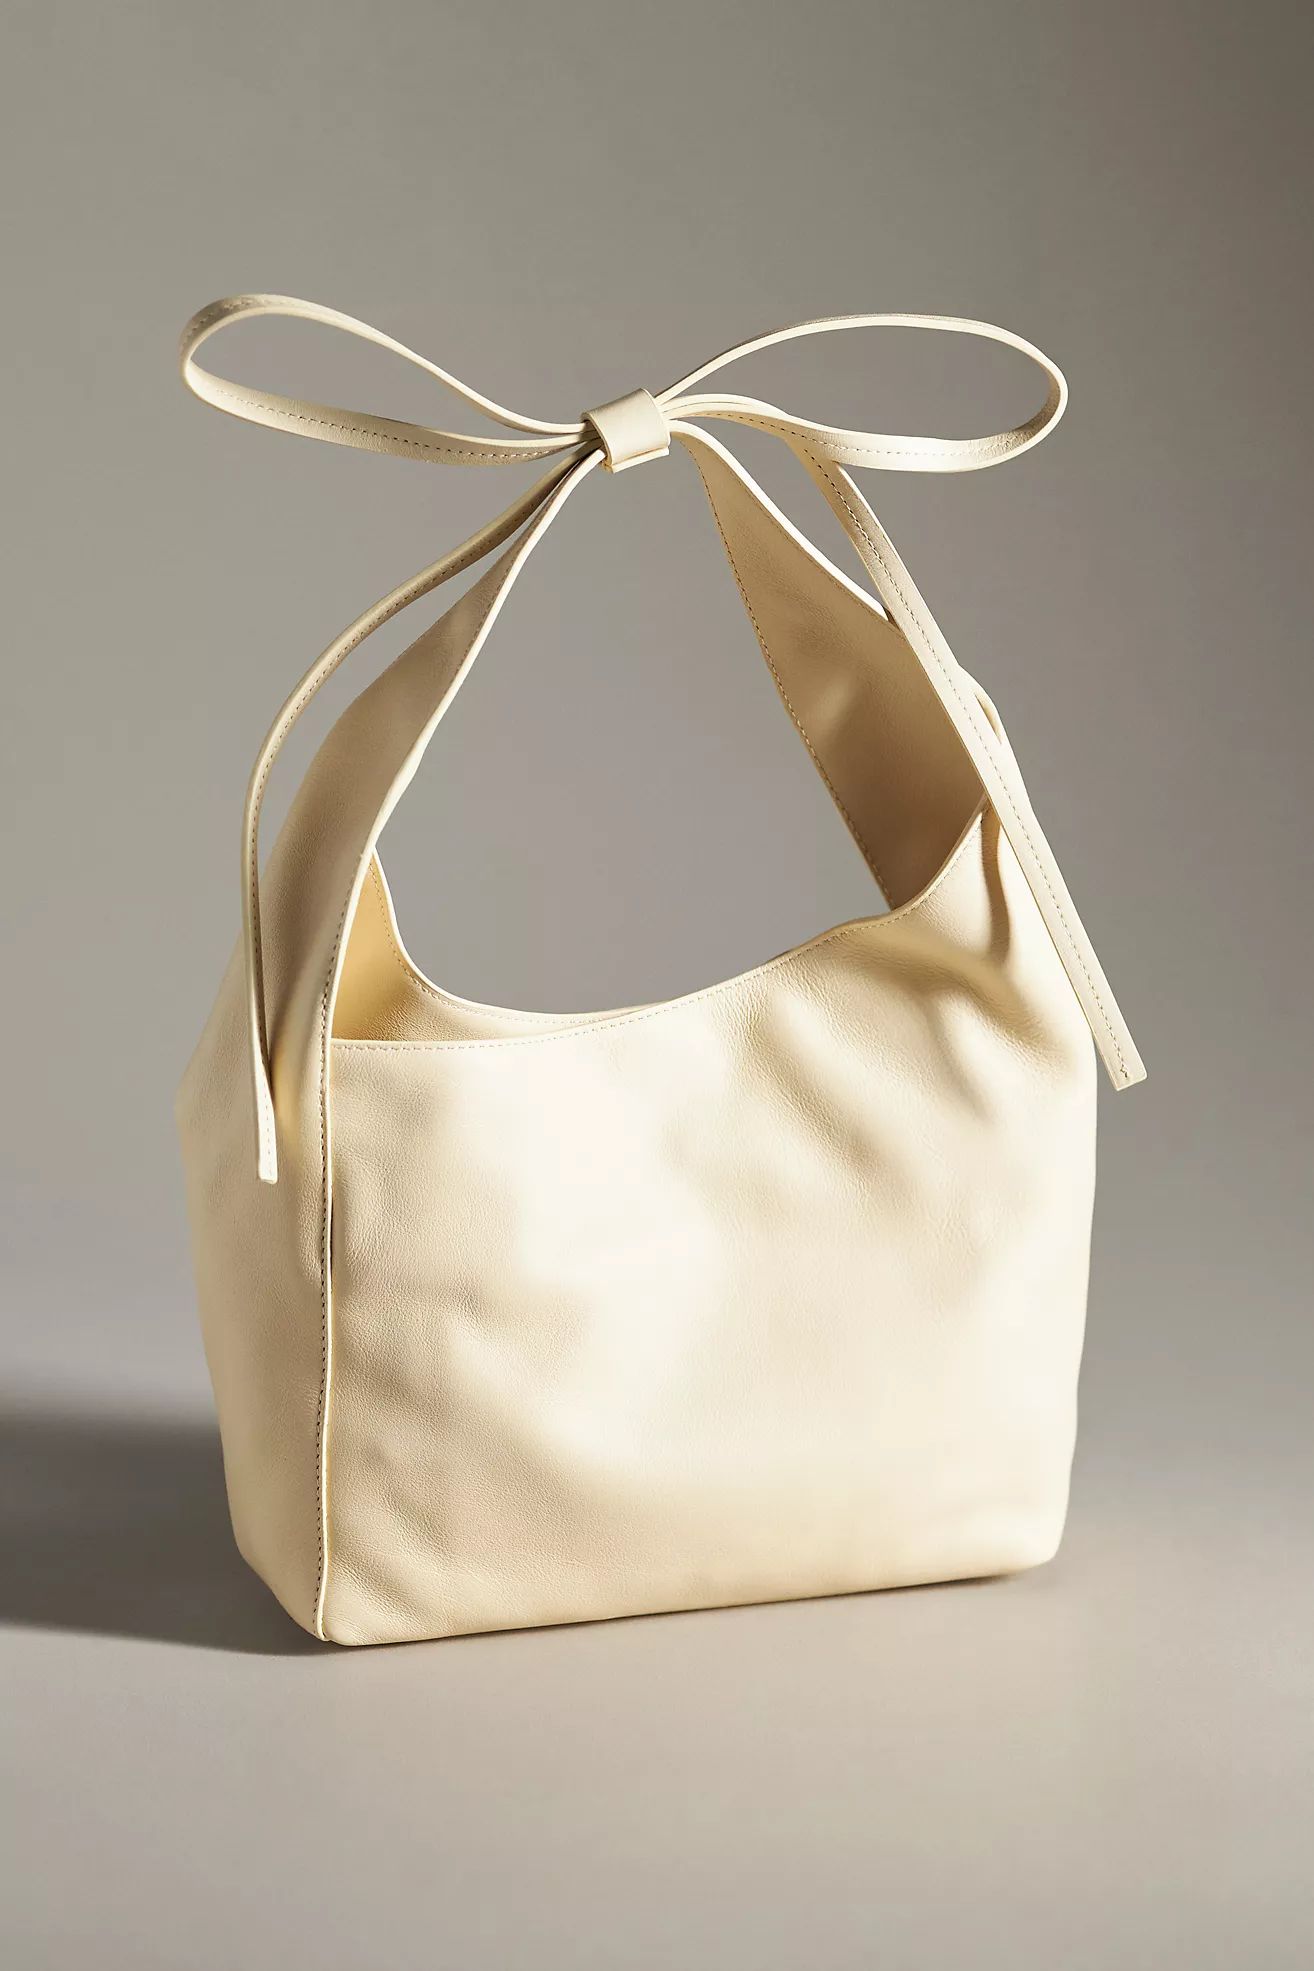 Reformation Small Vittoria Tote Bag | Anthropologie (US)